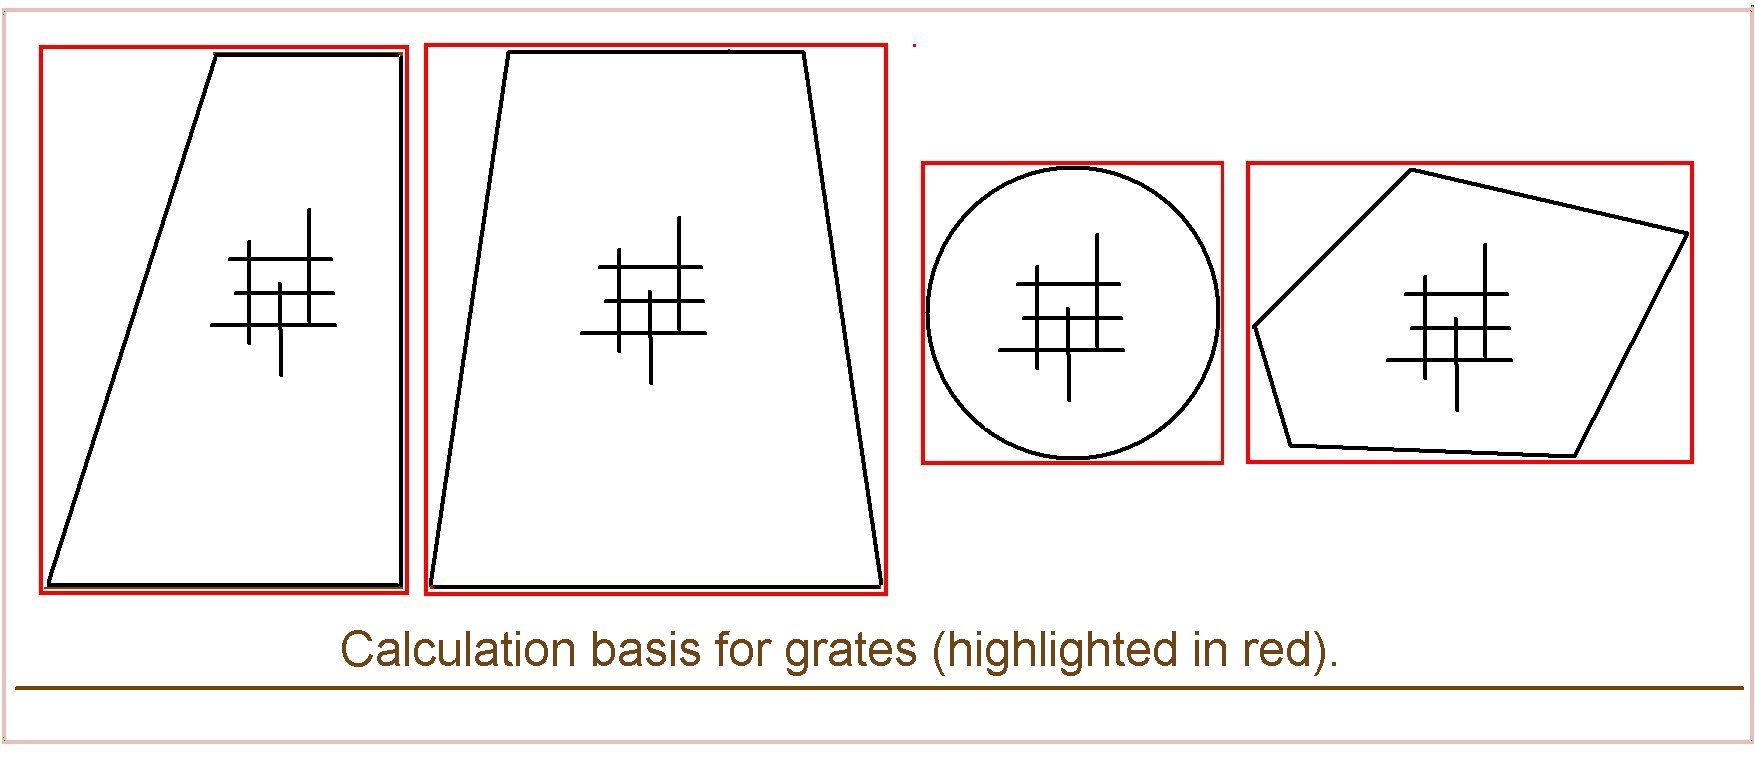 Calculation basis for grates